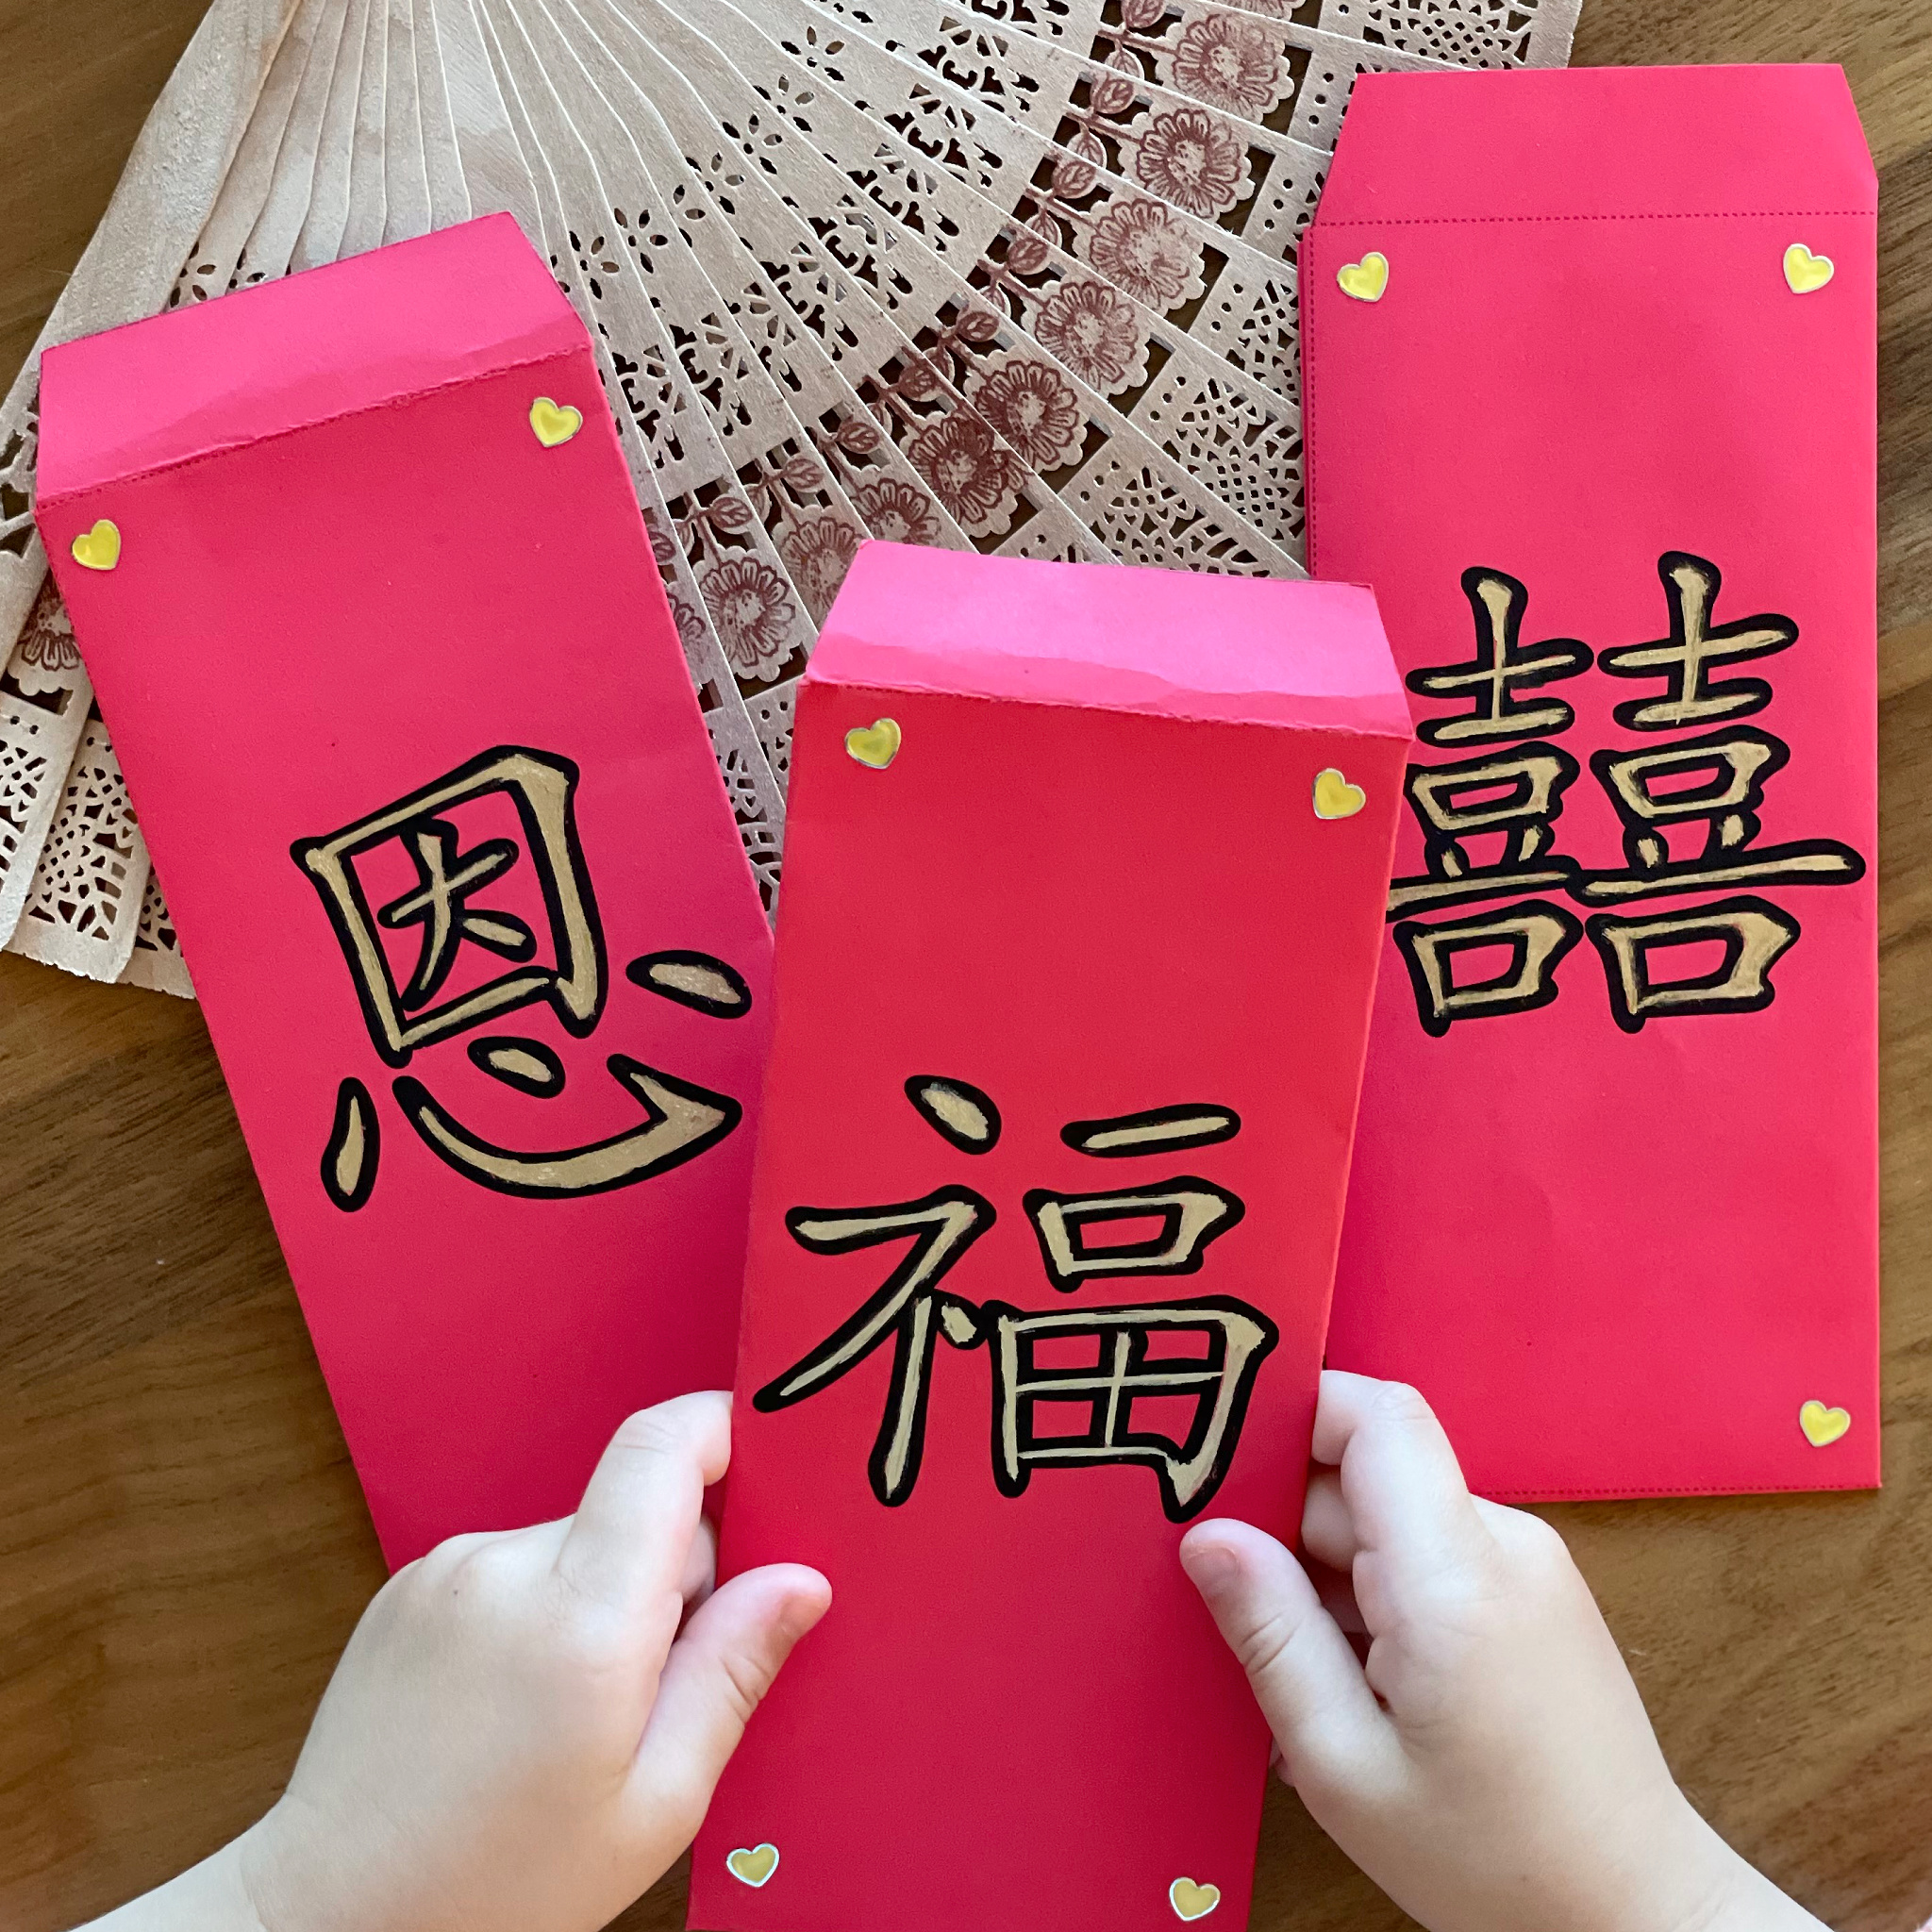 Dusør Scorch Steward Lucky Chinese Red Envelopes 红包 - Fun Printable and Video Tutorial!